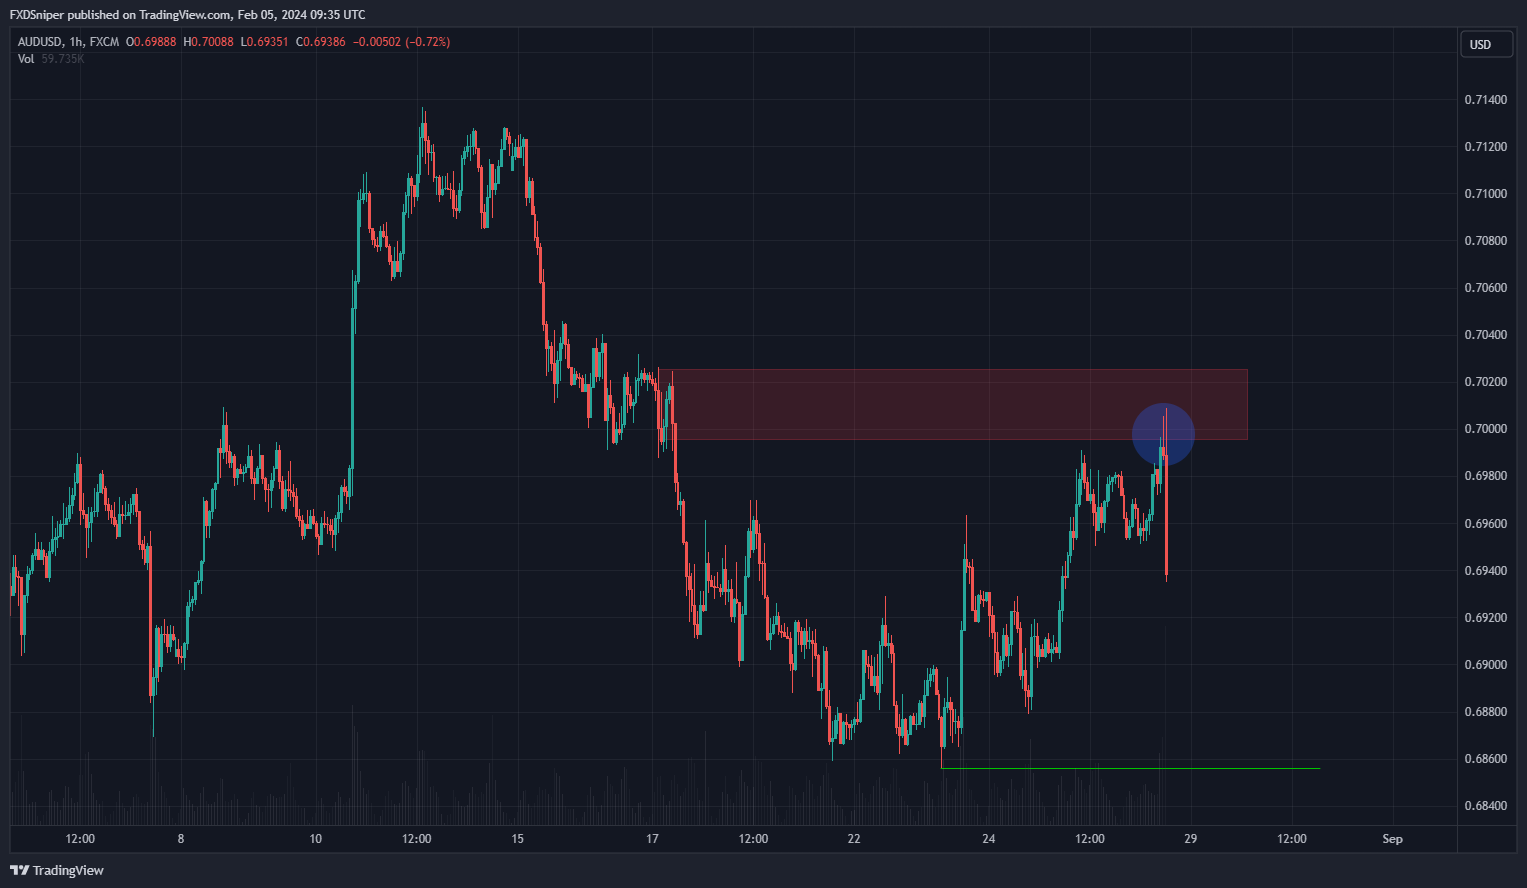 If you entered at this supply zone, would you target the low?